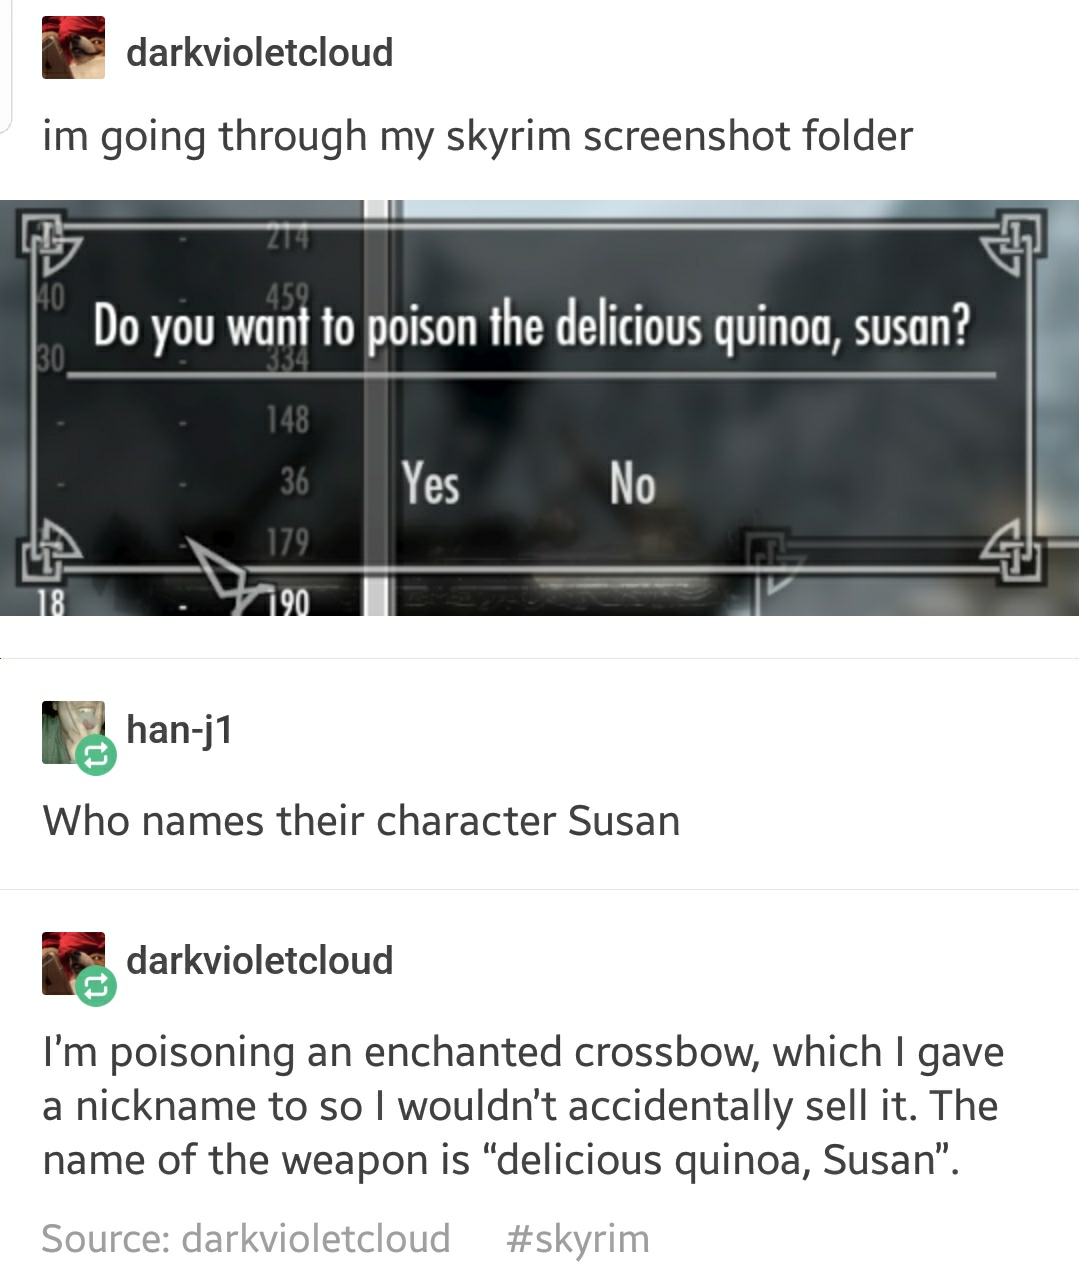 Funny exchange online of someone who renamed their enchanted crossbow to delicious quinoa, Susan